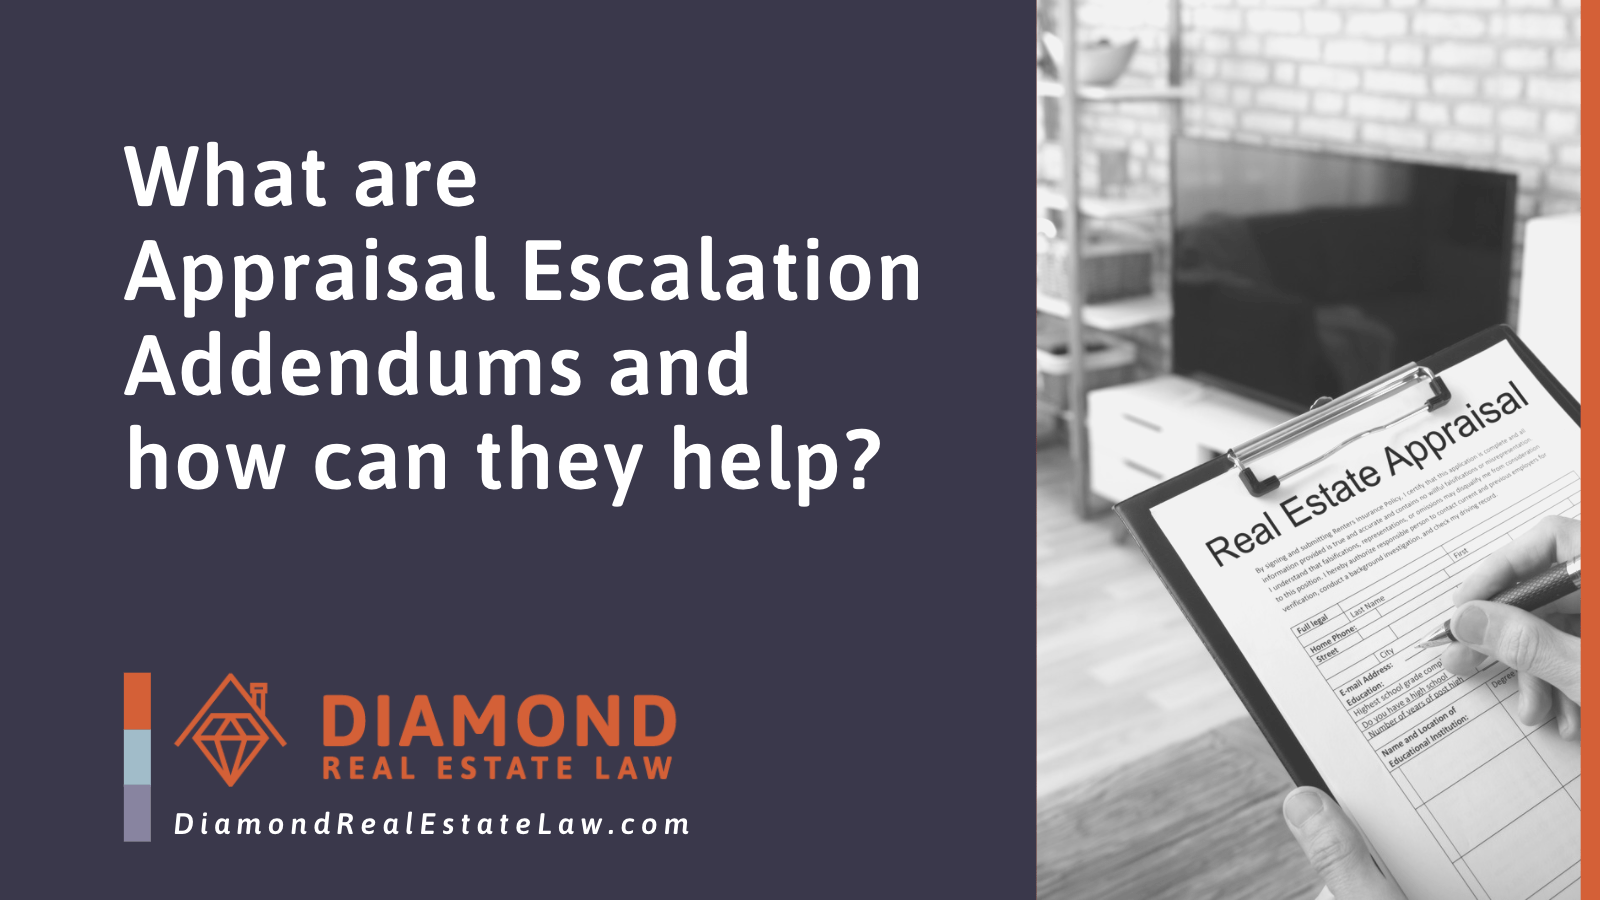 What are Appraisal Escalation Addendums and how can they help - Diamond Real Estate Law | McHenry, IL Residential Real Estate Lawyer